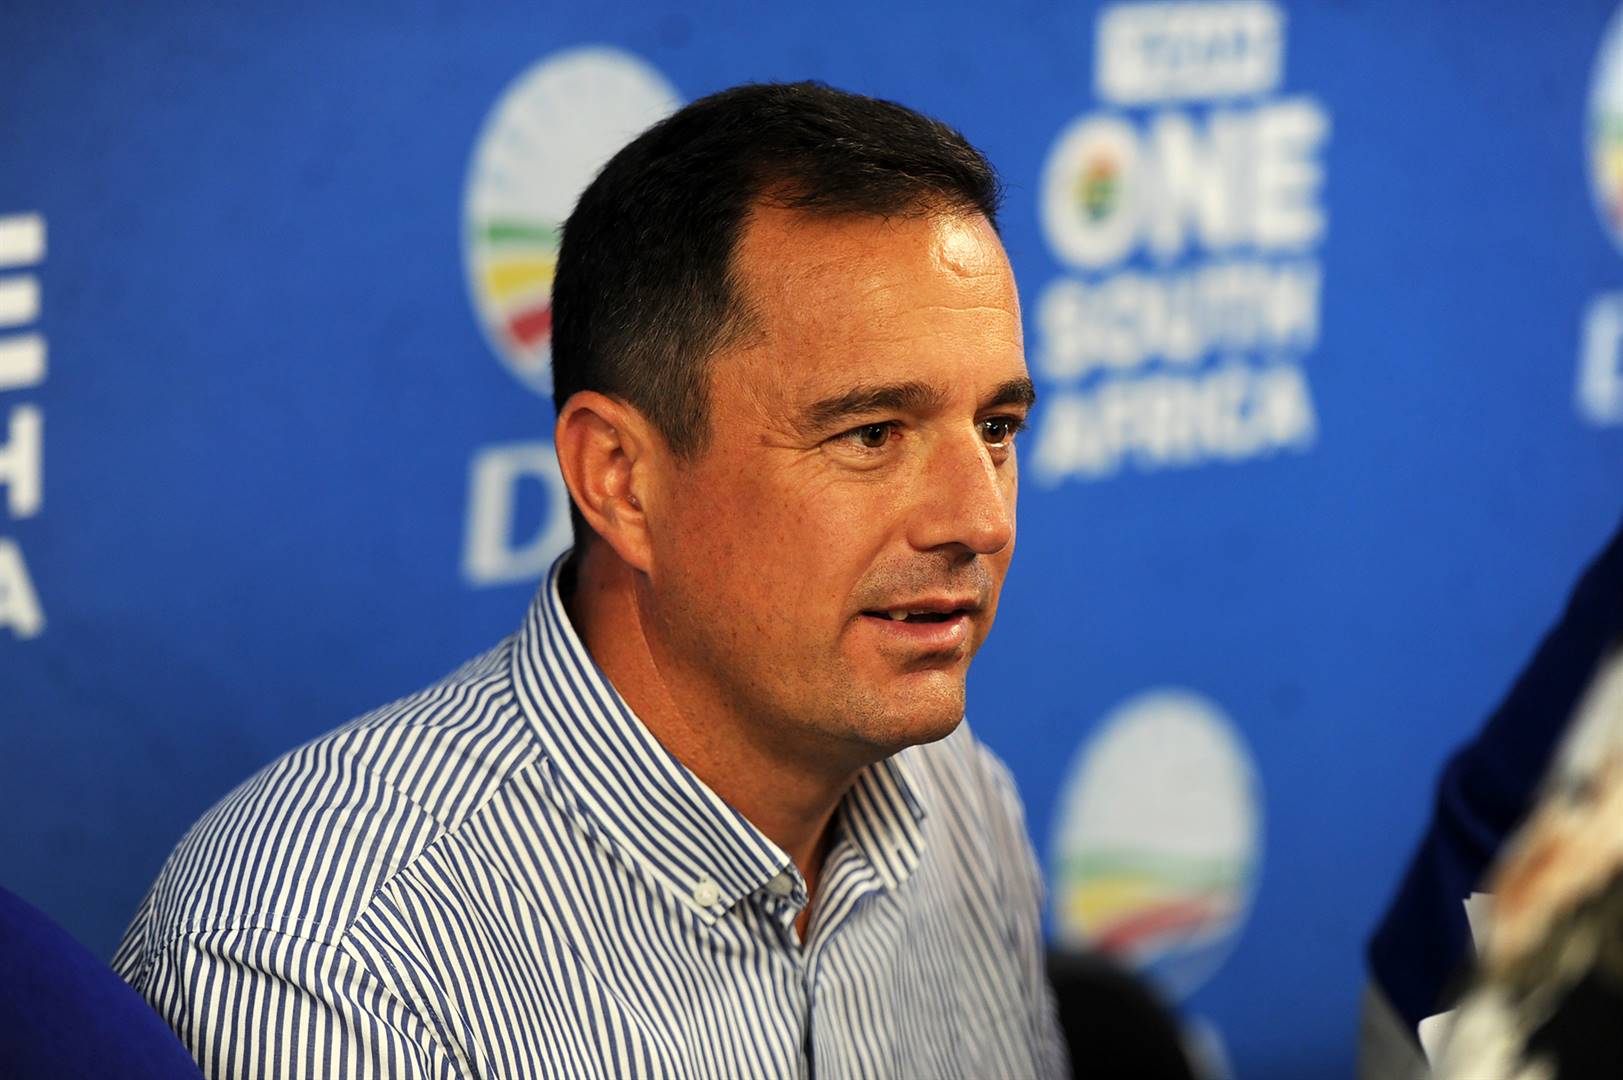 Steenhuisen said the DA had ploughed most of its campaign funds into Nelson Mandela Bay and Johannesburg, in the hope that it would win outright majorities in those metros. Photo: Daily Sun